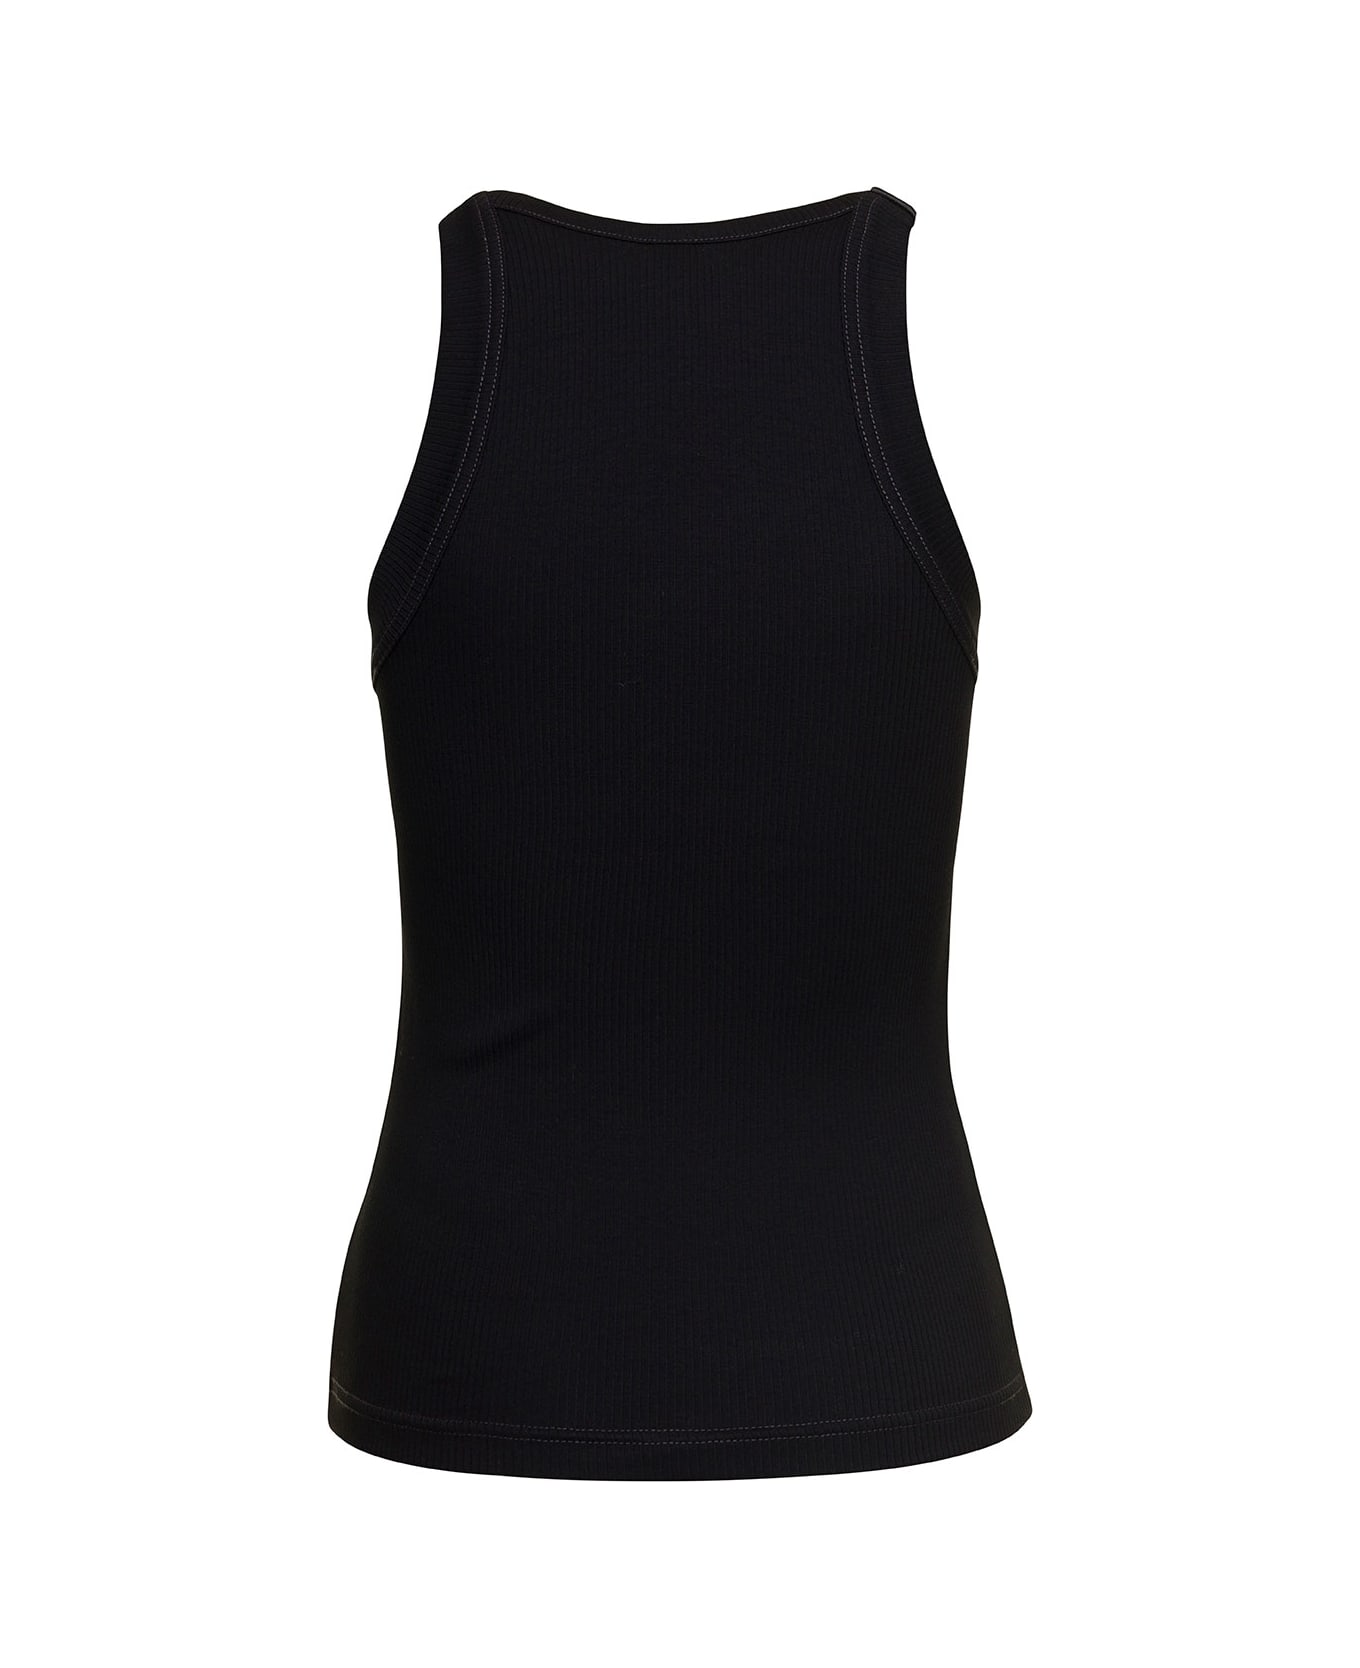 Dion Lee Black Ribbed Tank Top With Branded Buckle Detail In Stretch Cotton Woman - Black